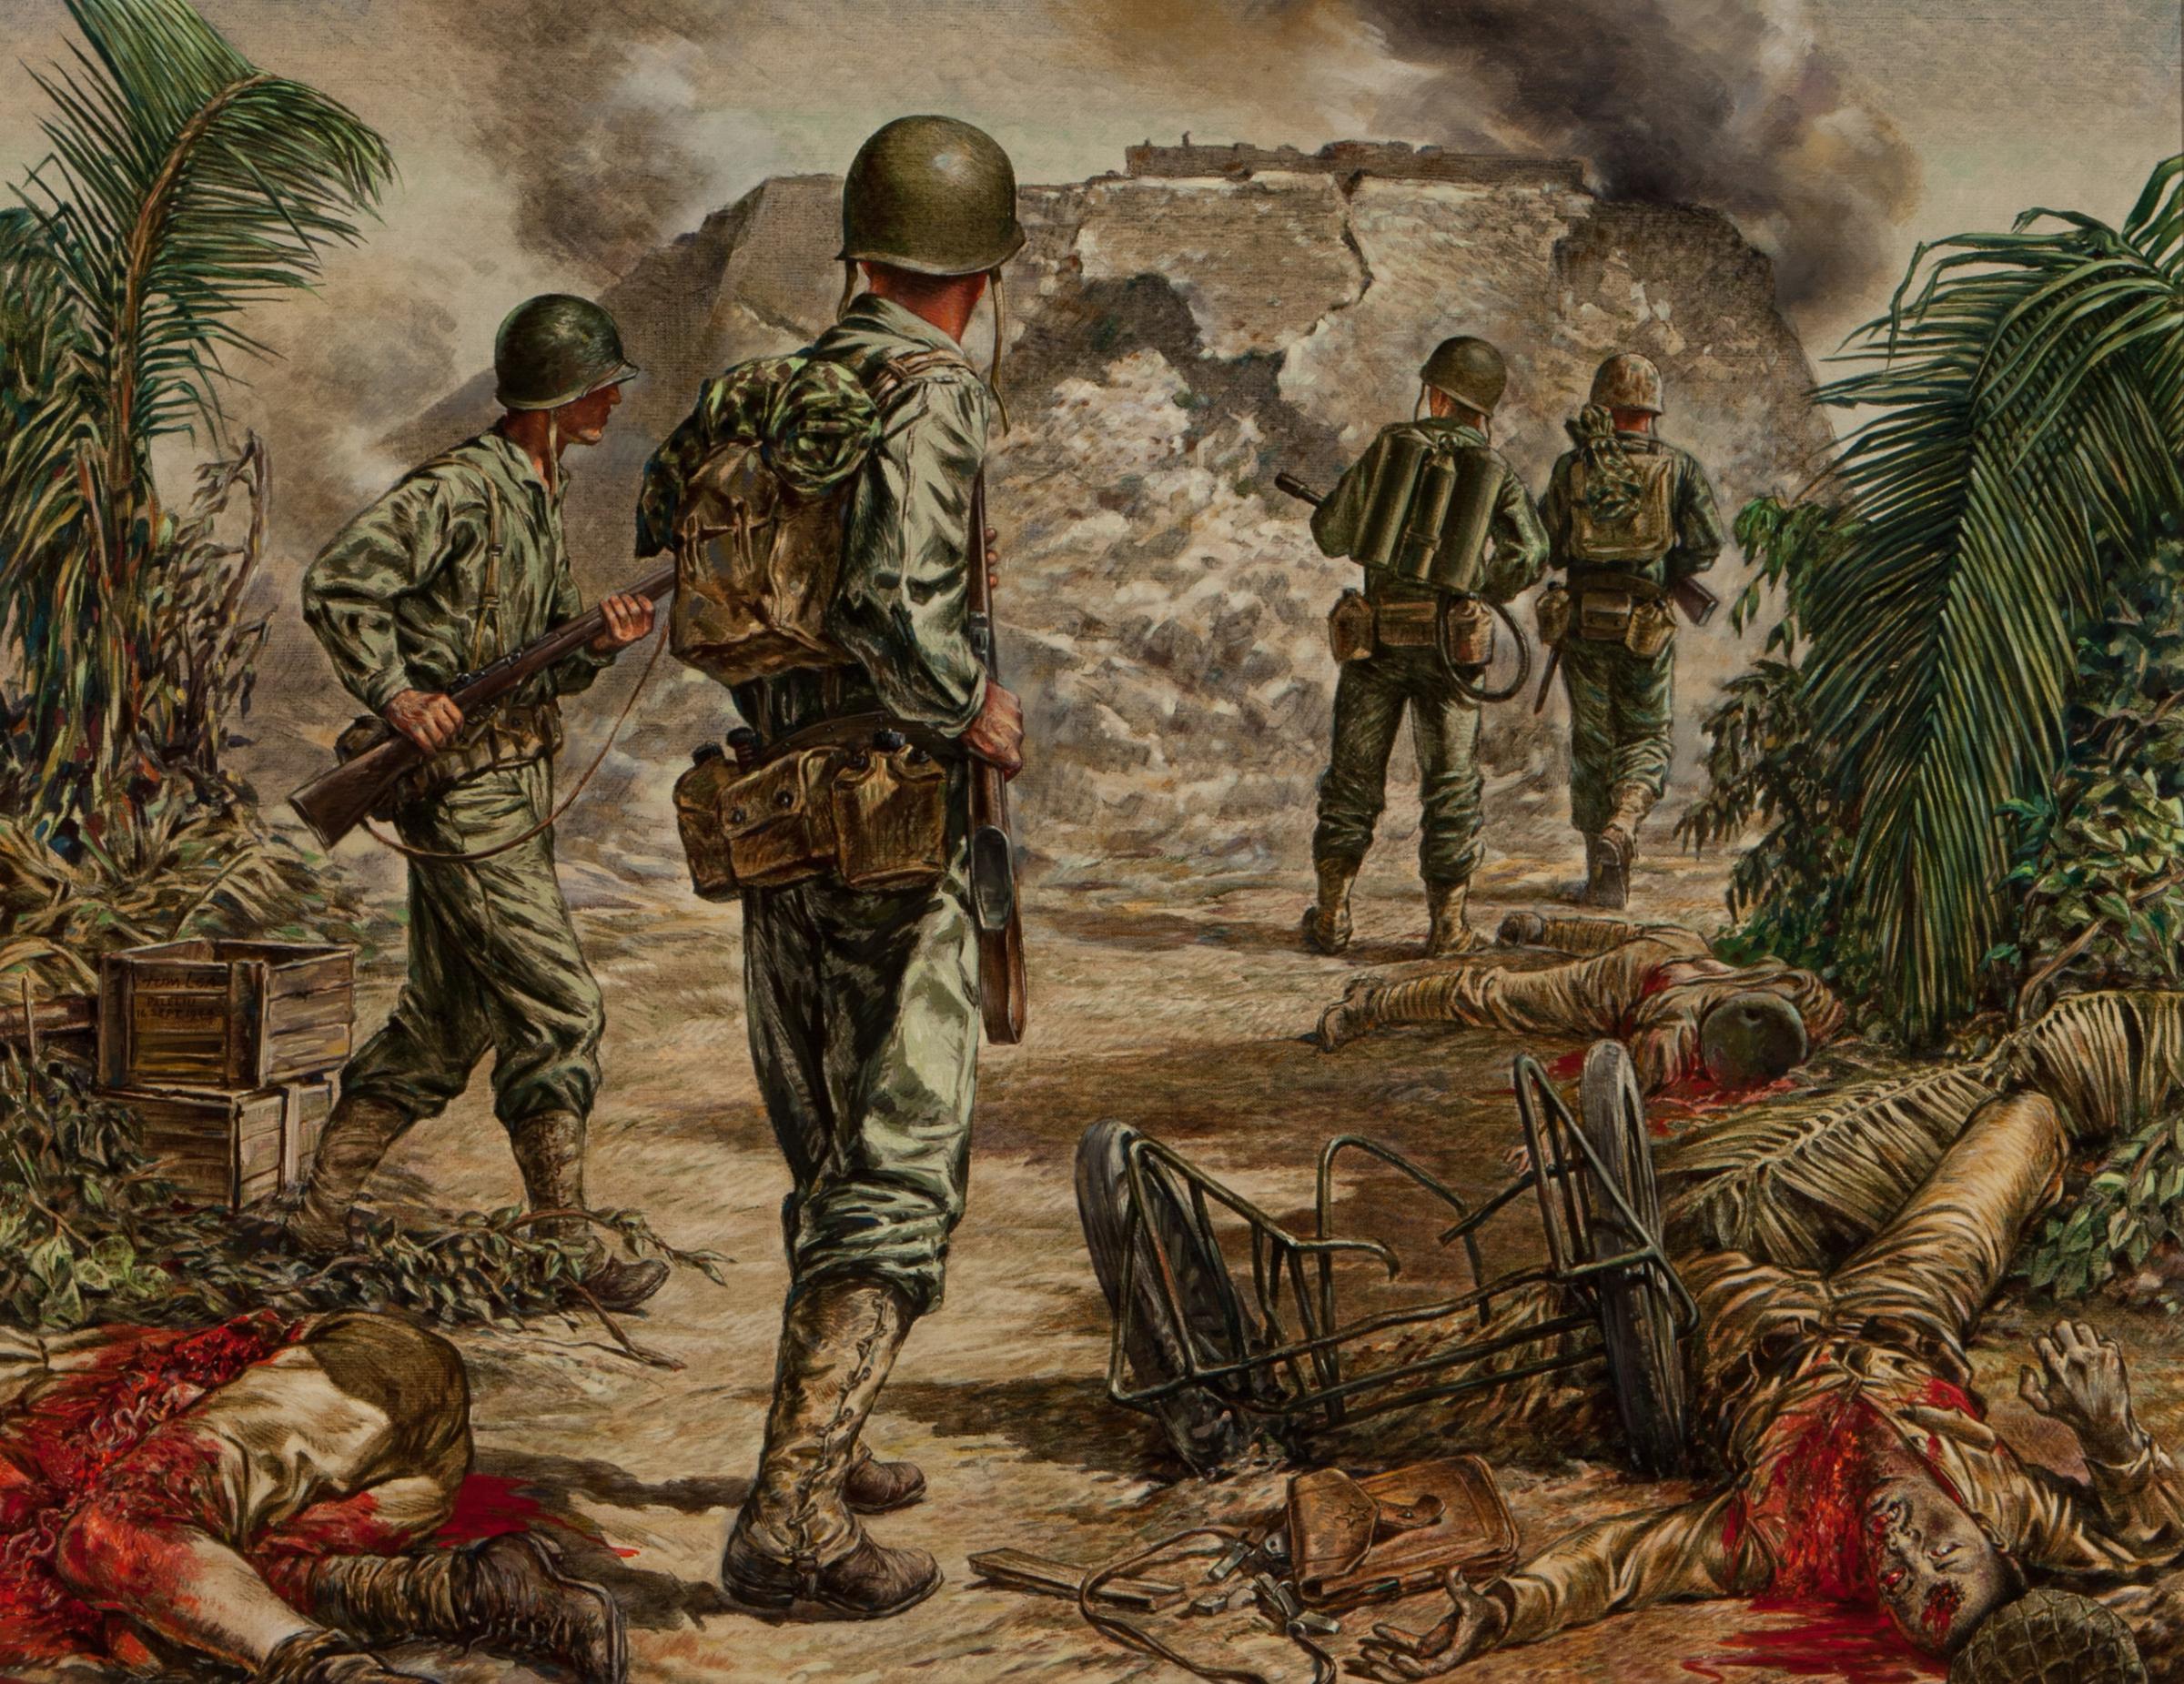 WWII painting from LIFE magazine by Tom Lea.